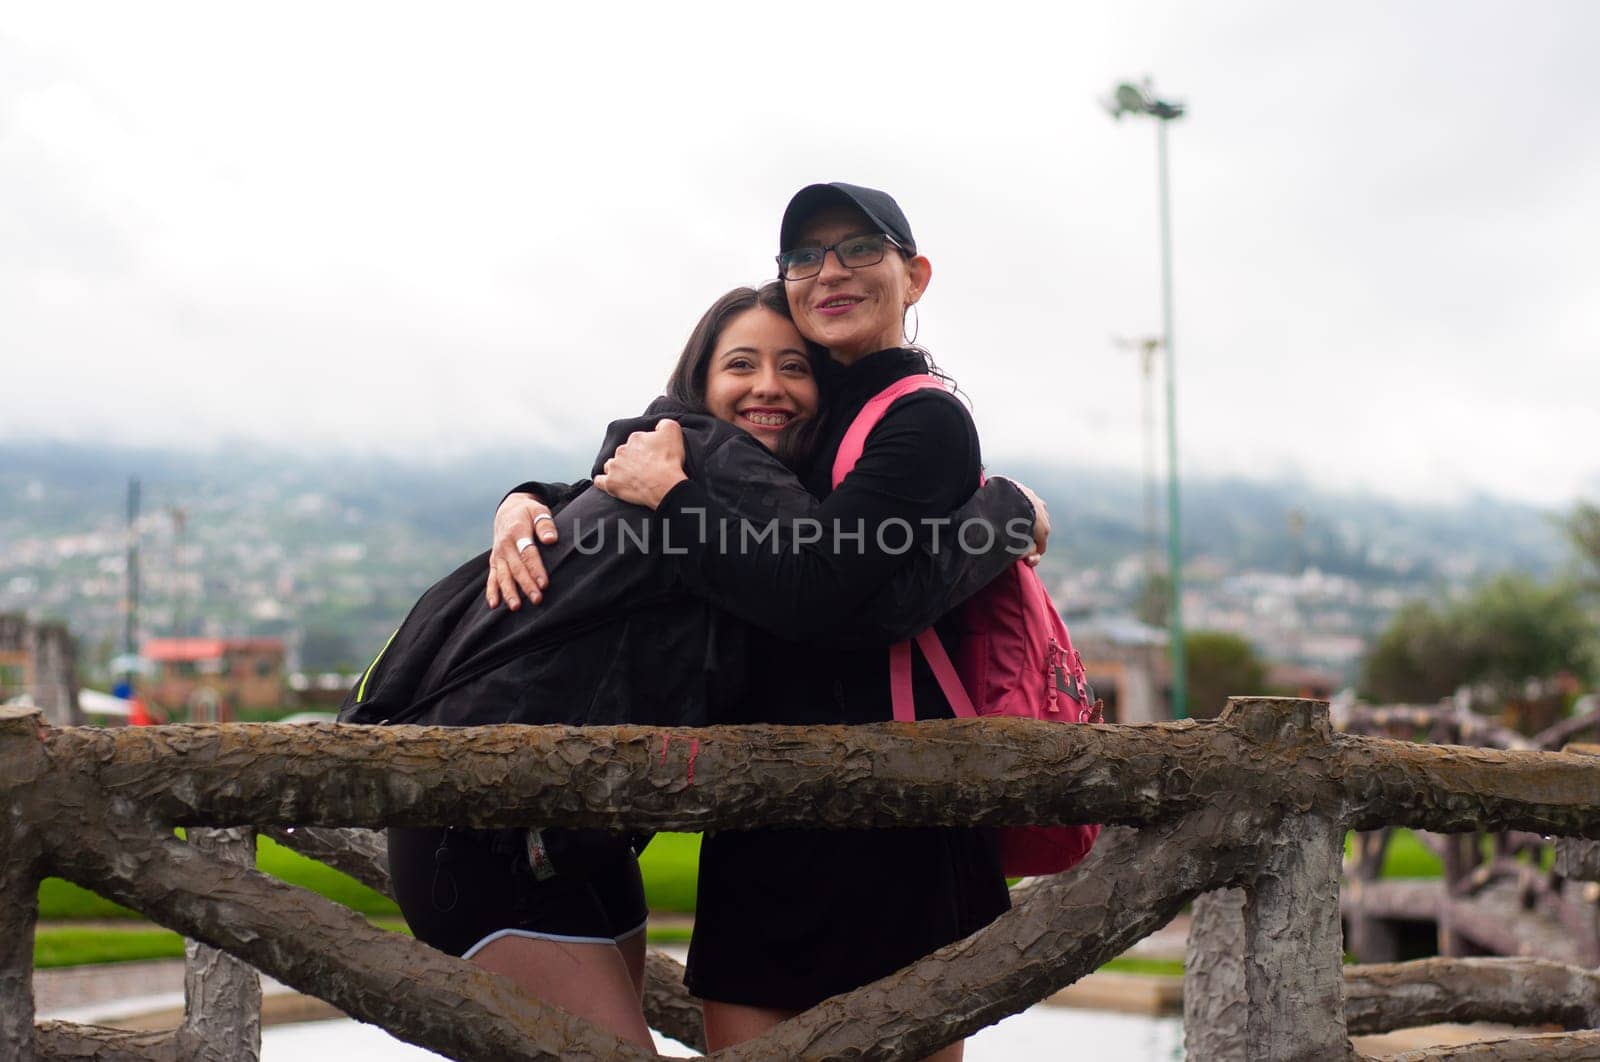 Mother and daughter in black sportswear hugging on a wooden bridge in a natural environment, both are very happy. High quality photo